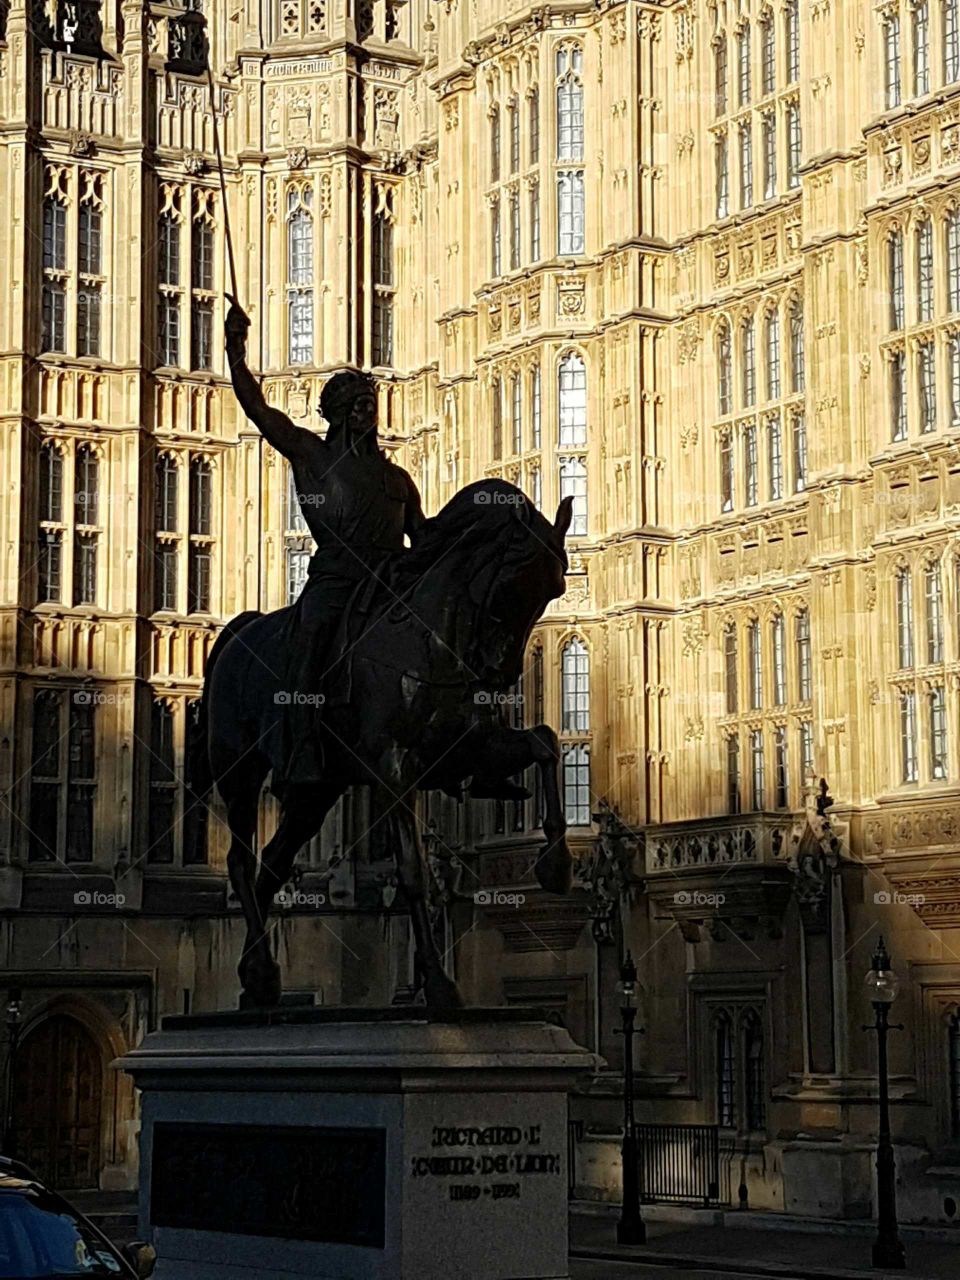 England Architecture and Statue